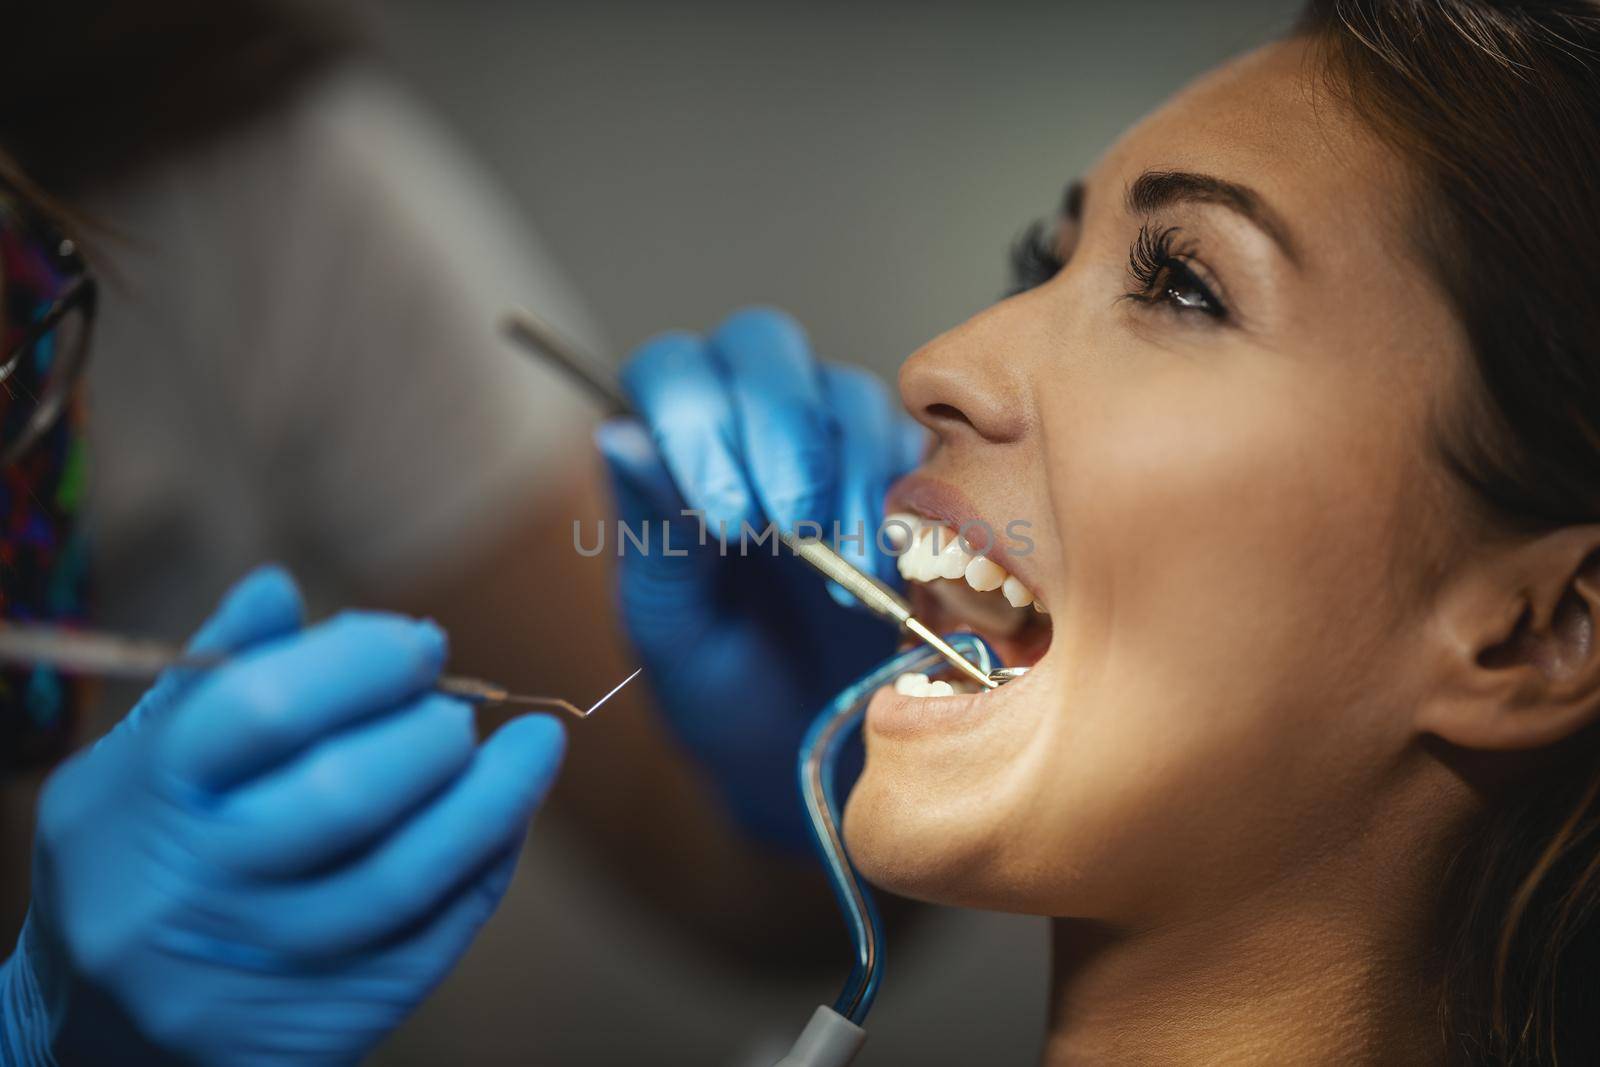 The beautiful young woman is at the dentist. She sits in the dentist's chair and the dentist sets braces on her teeth putting aesthetic self-aligning lingual locks.